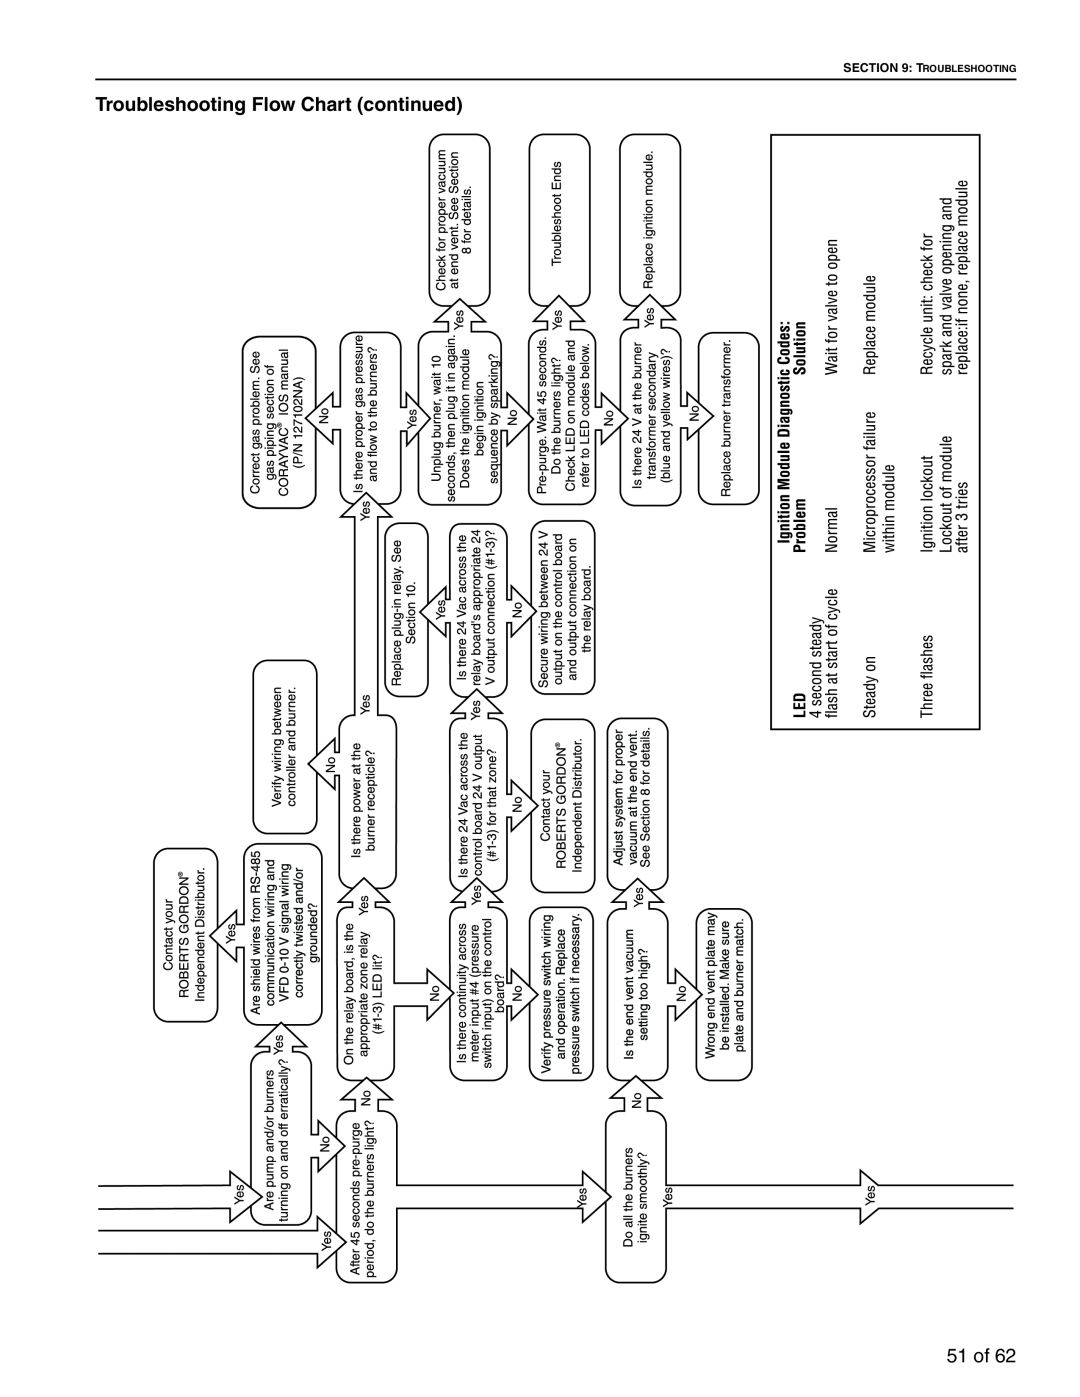 Roberts Gorden 10081601NA Rev H 12/11 service manual Troubleshooting Flow Chart continued, 51 of 